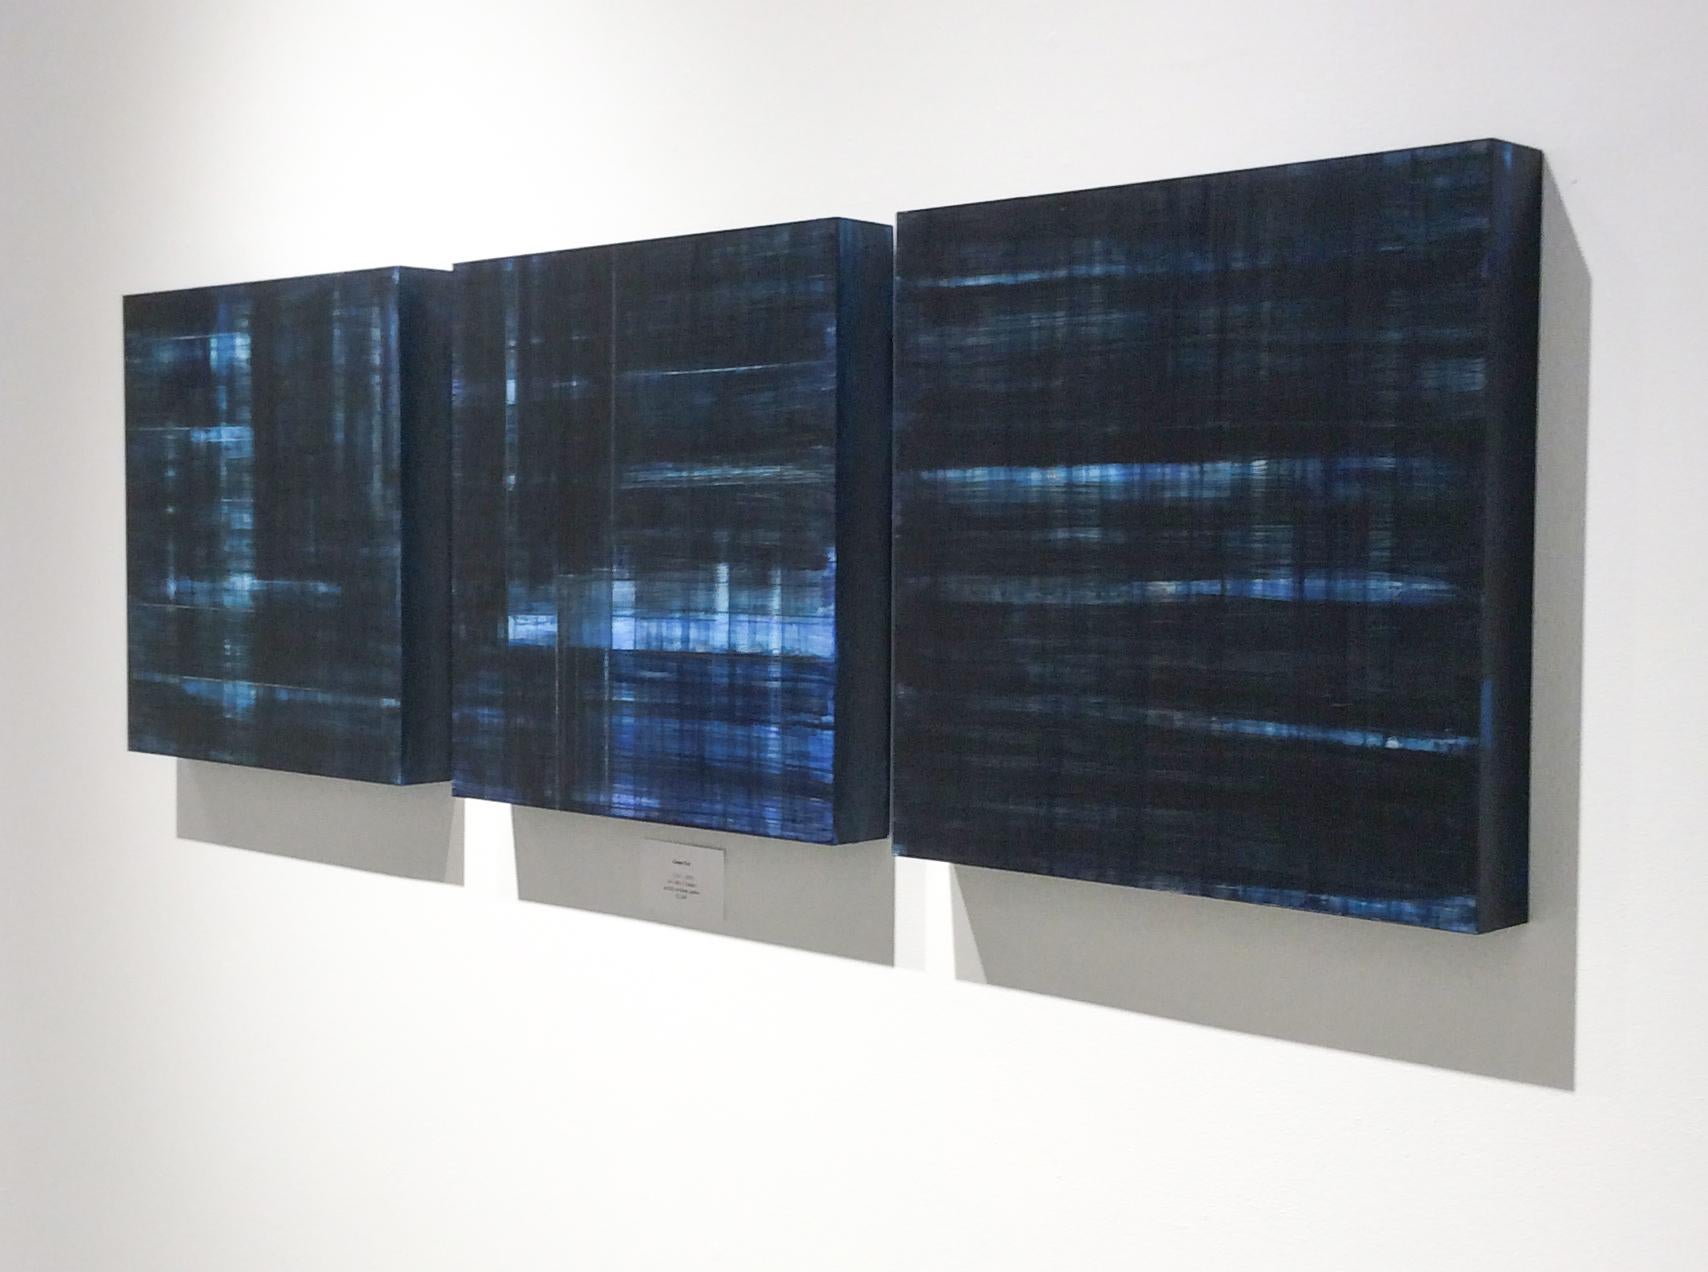 Abstract minimalist color field painting in dark blue on three panels
Acrylic on clay board panels
Each panel measures 16 x 16 x 2 inches
The painting can be installed horizontally or vertically 
Suggested installation is 1-2 inches between panels,